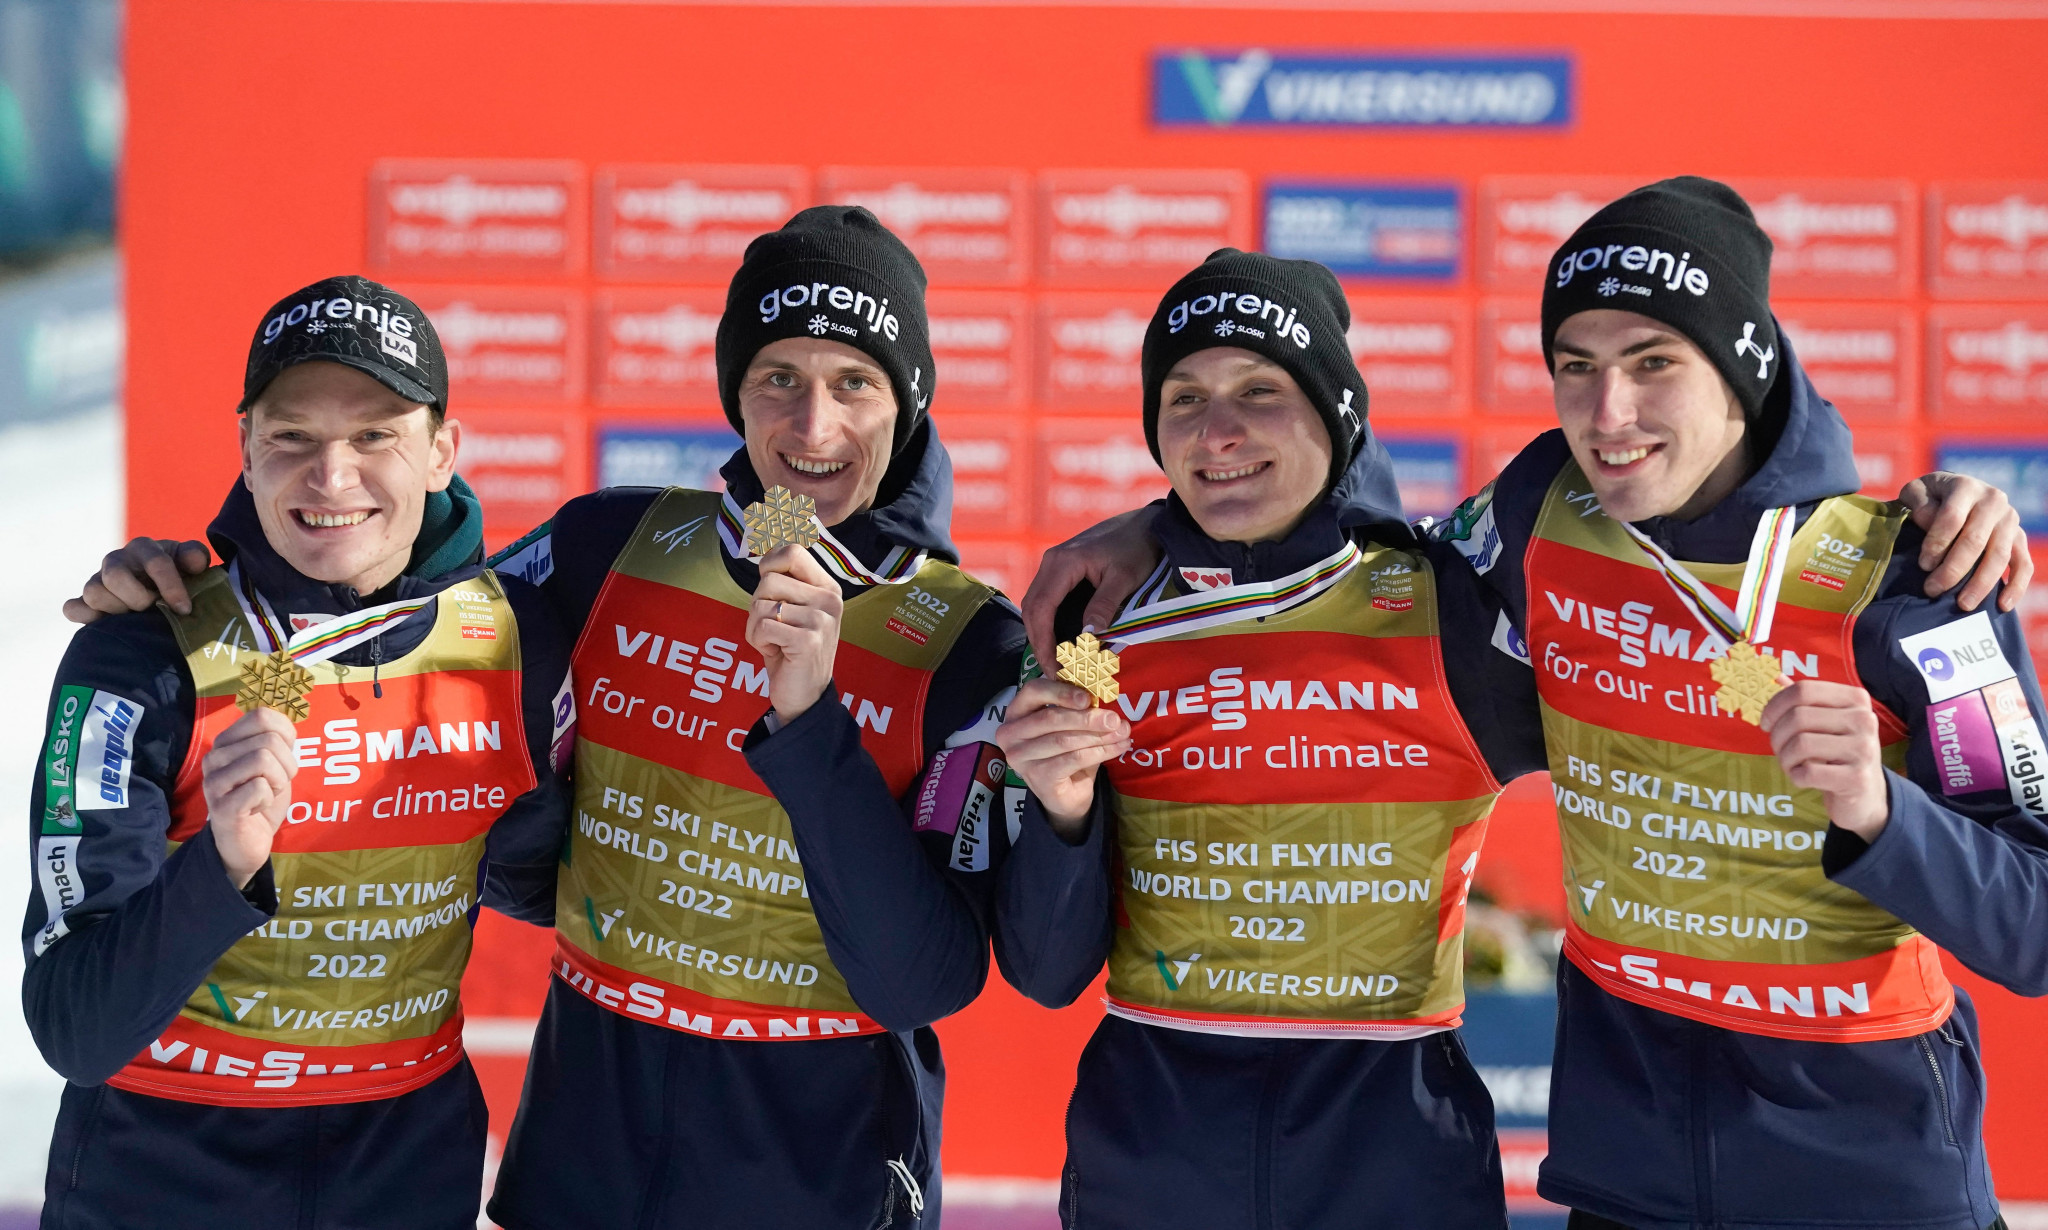 Slovenia lift team title at FIS Ski Flying World Championships for first time 